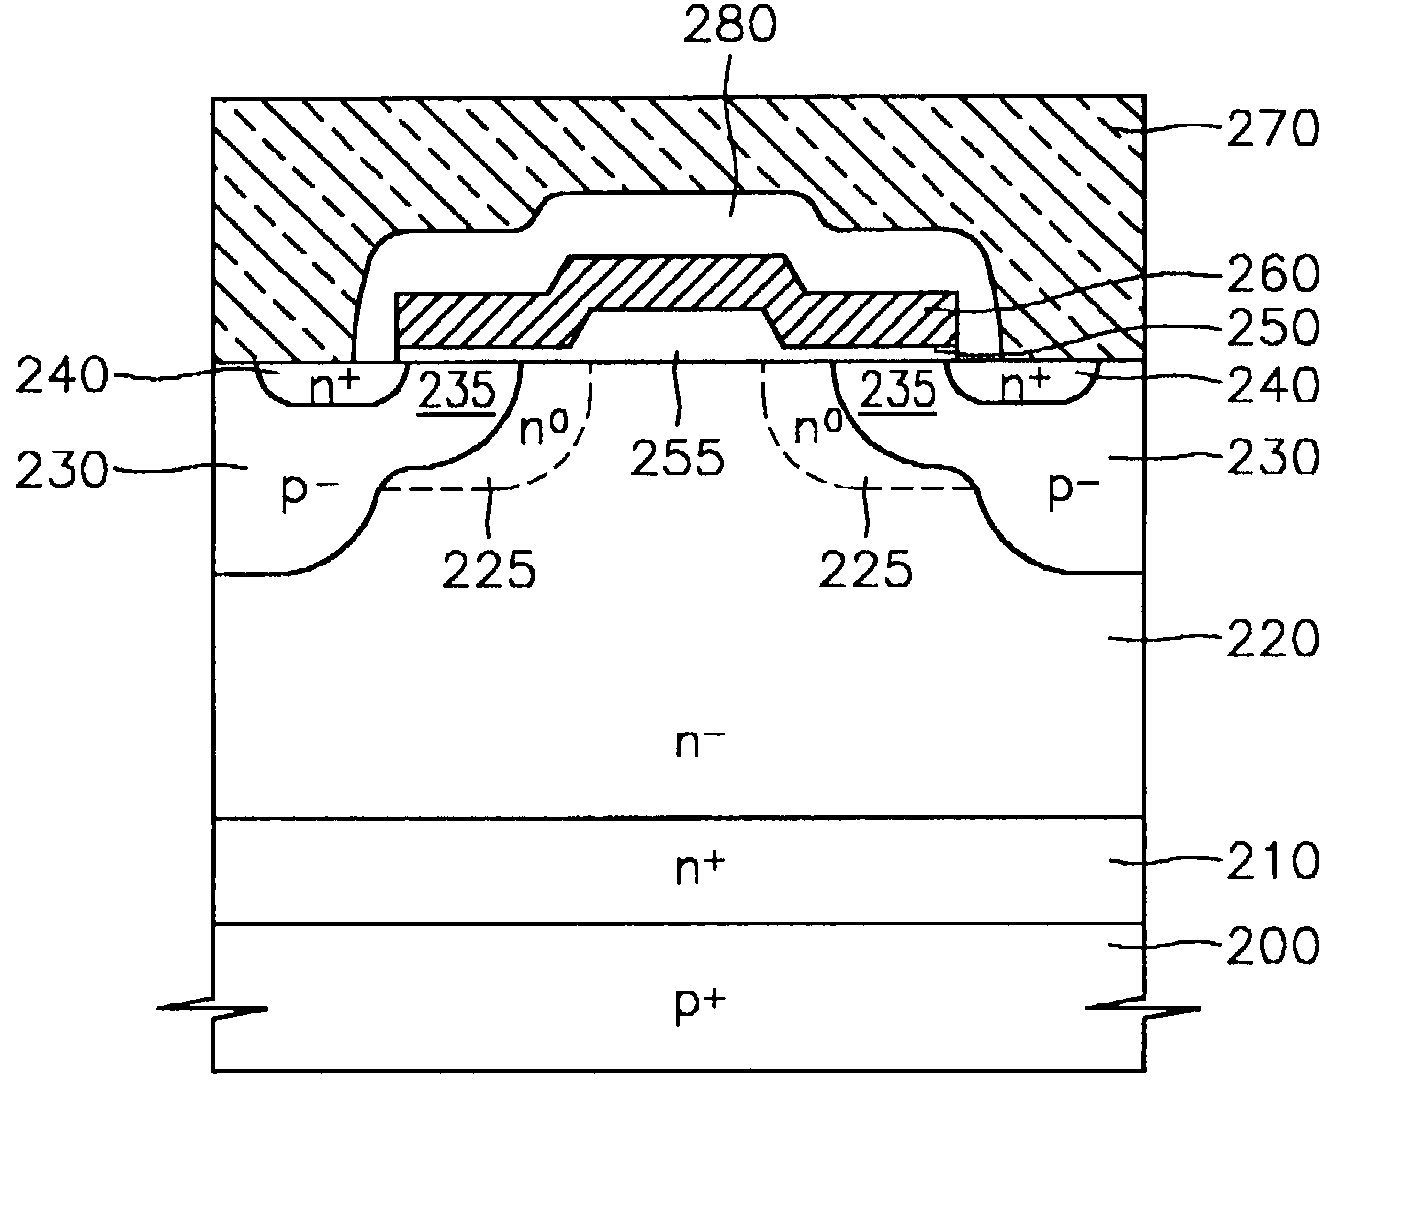 Mos-gated power semiconductor device